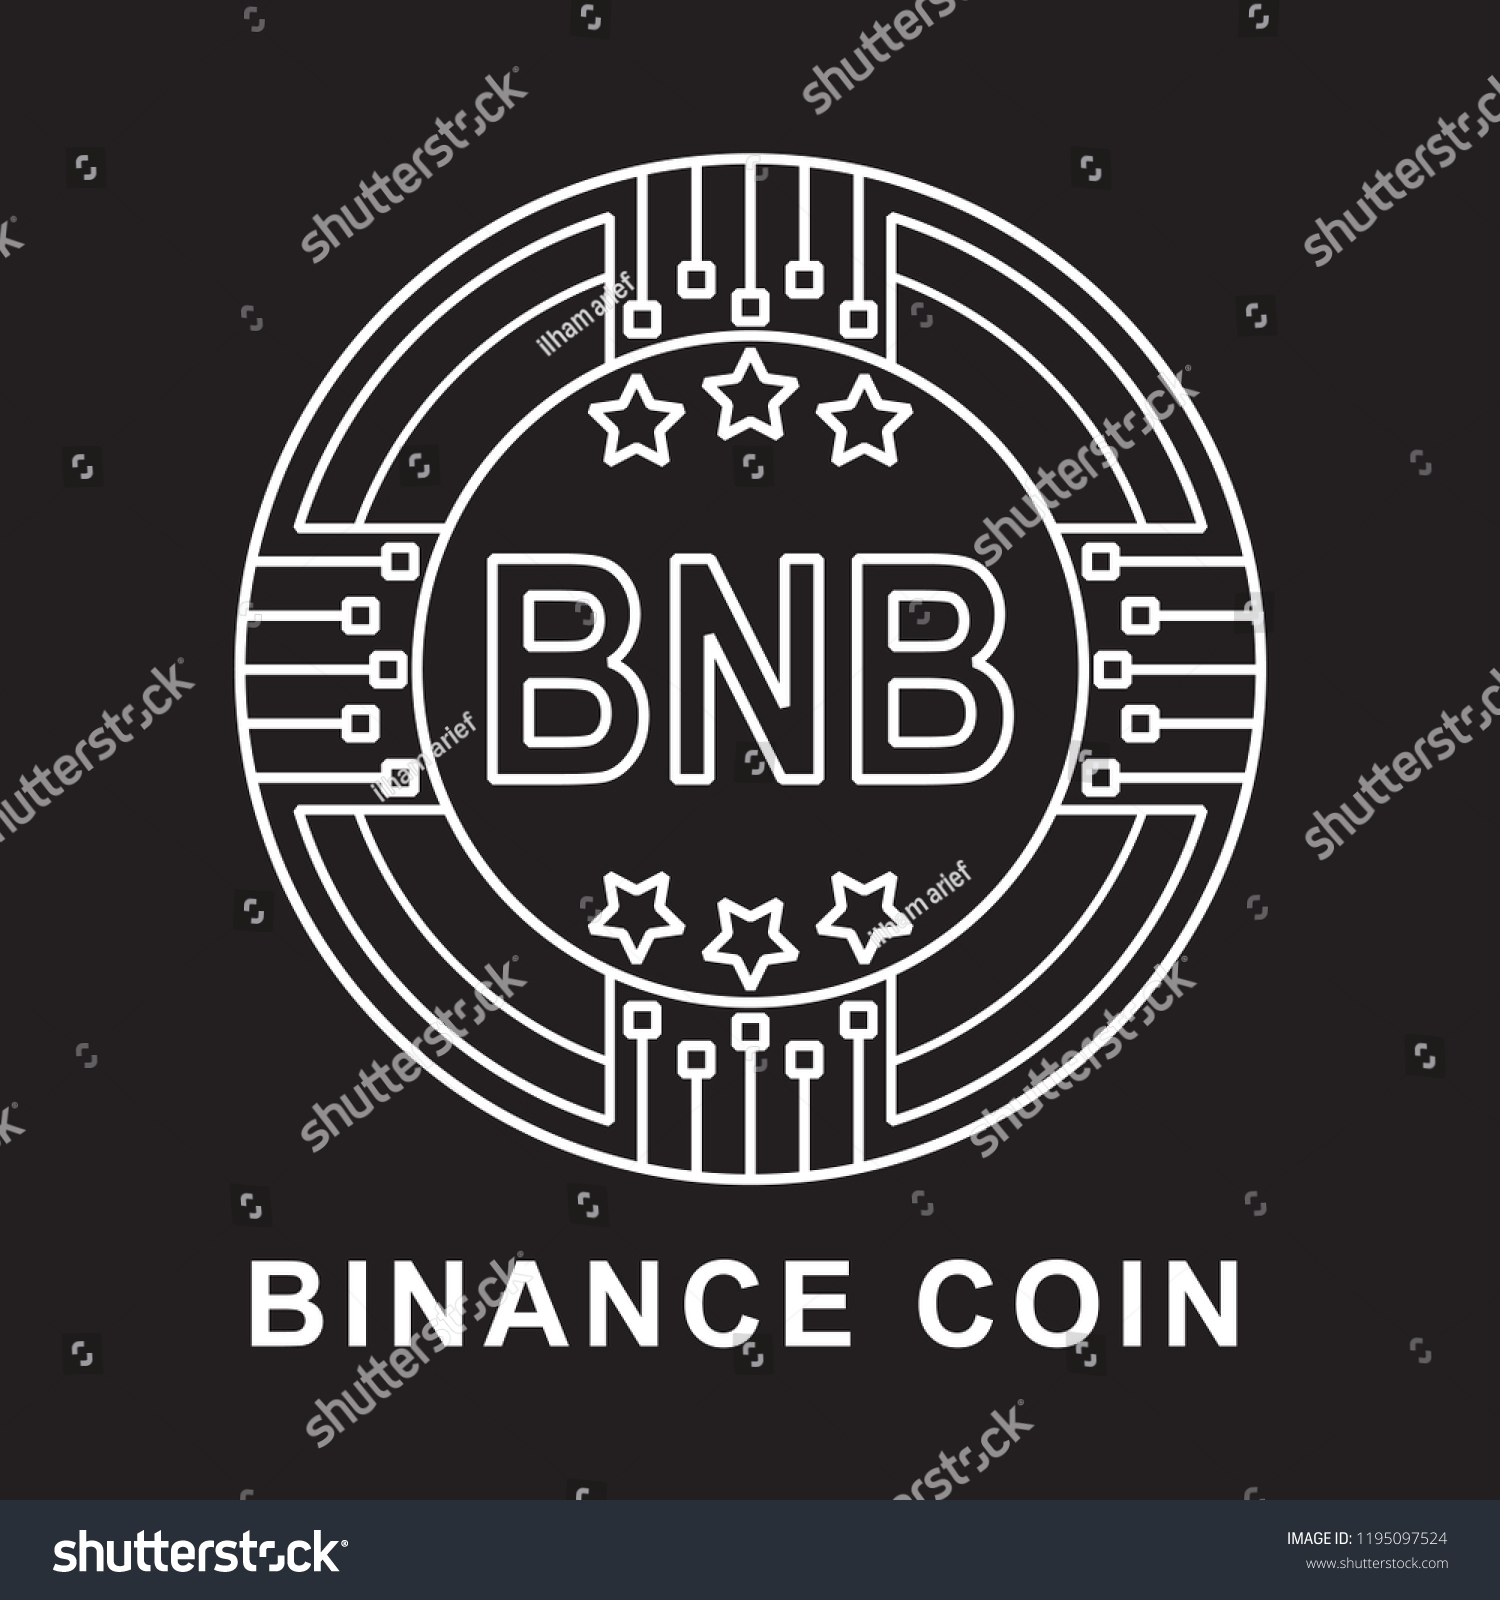 SVG of binance coin bnb Cryptocurrency  icon with black background svg